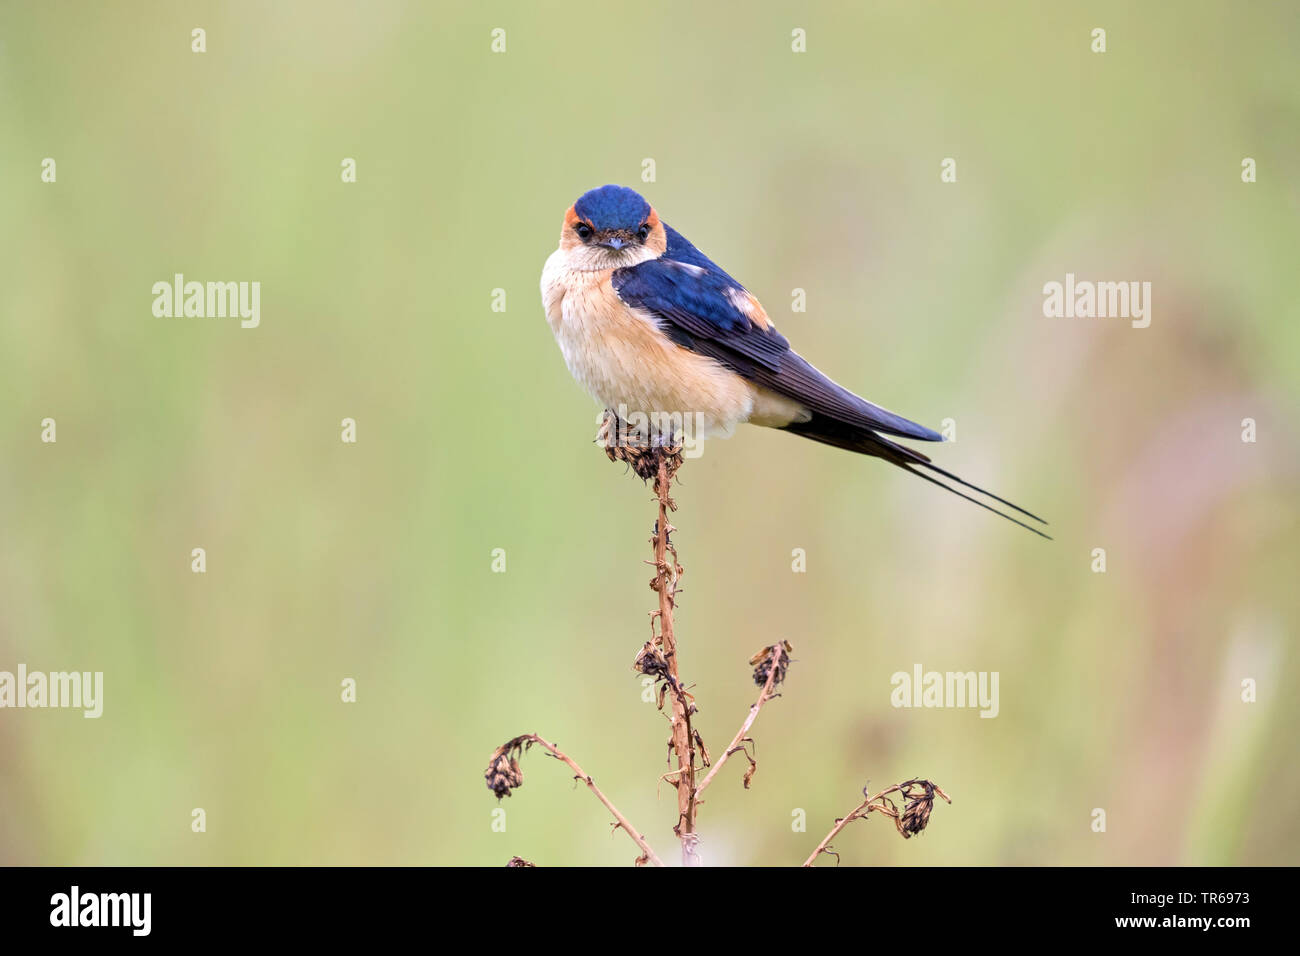 red-rumped swallow (Hirundo daurica), on a plant in a meadow, Greece, Lesbos Stock Photo